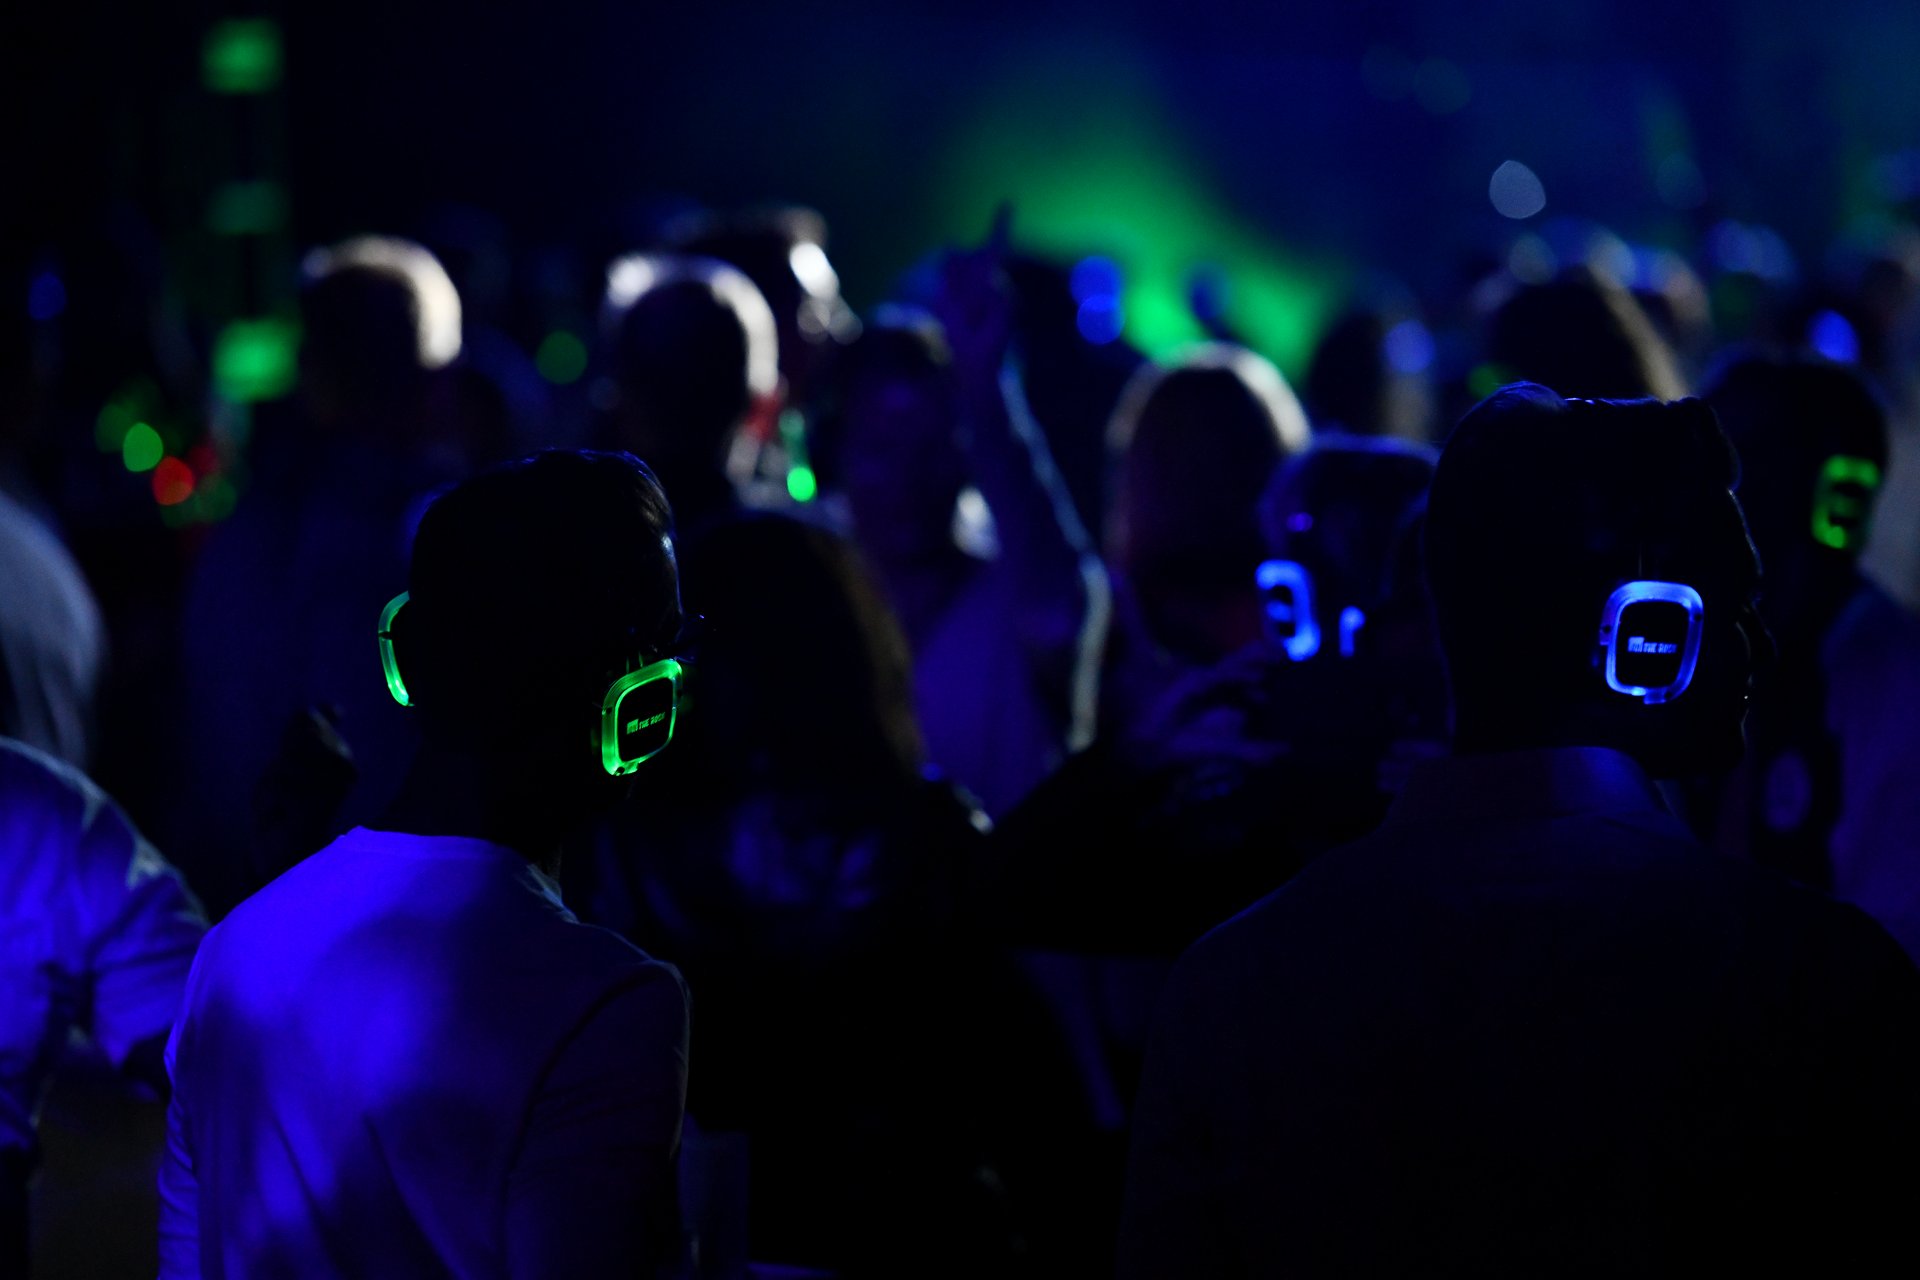 ON THE ROCK Silent Disco Party Headphones